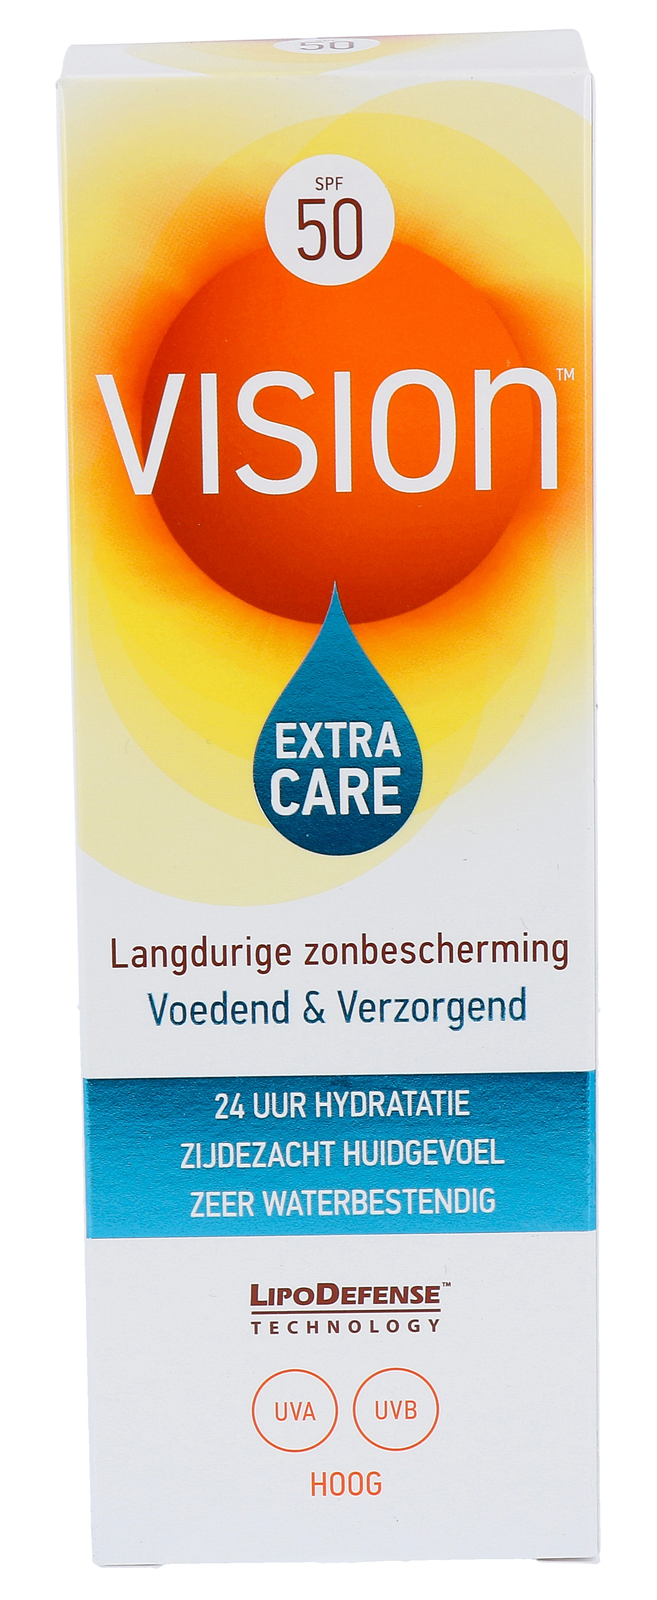 Image of Vision Extra Care SPF50